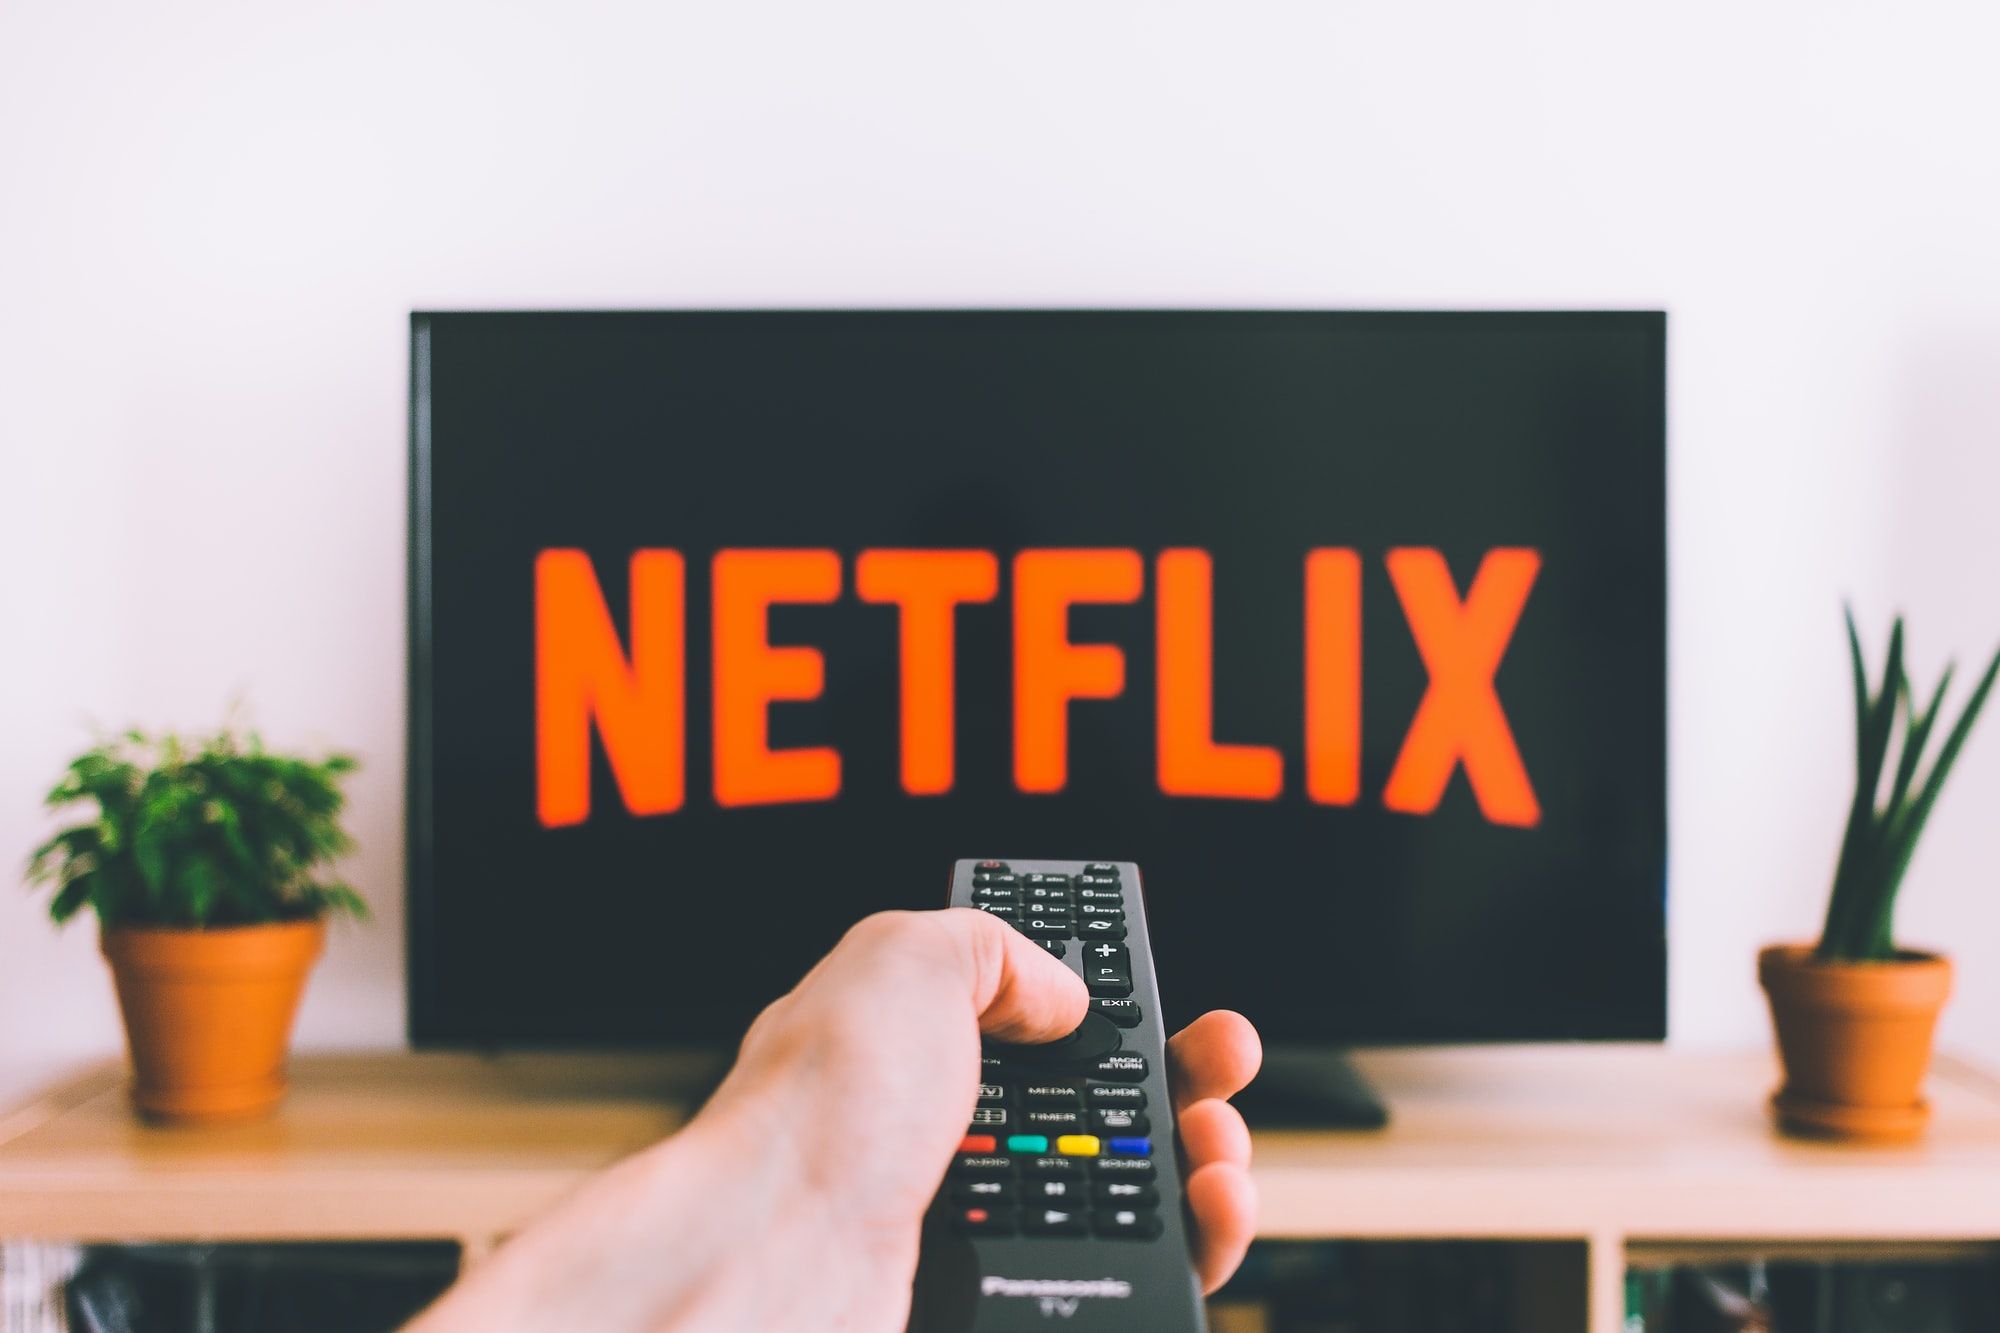 Guide: What VPN to use for Netflix?